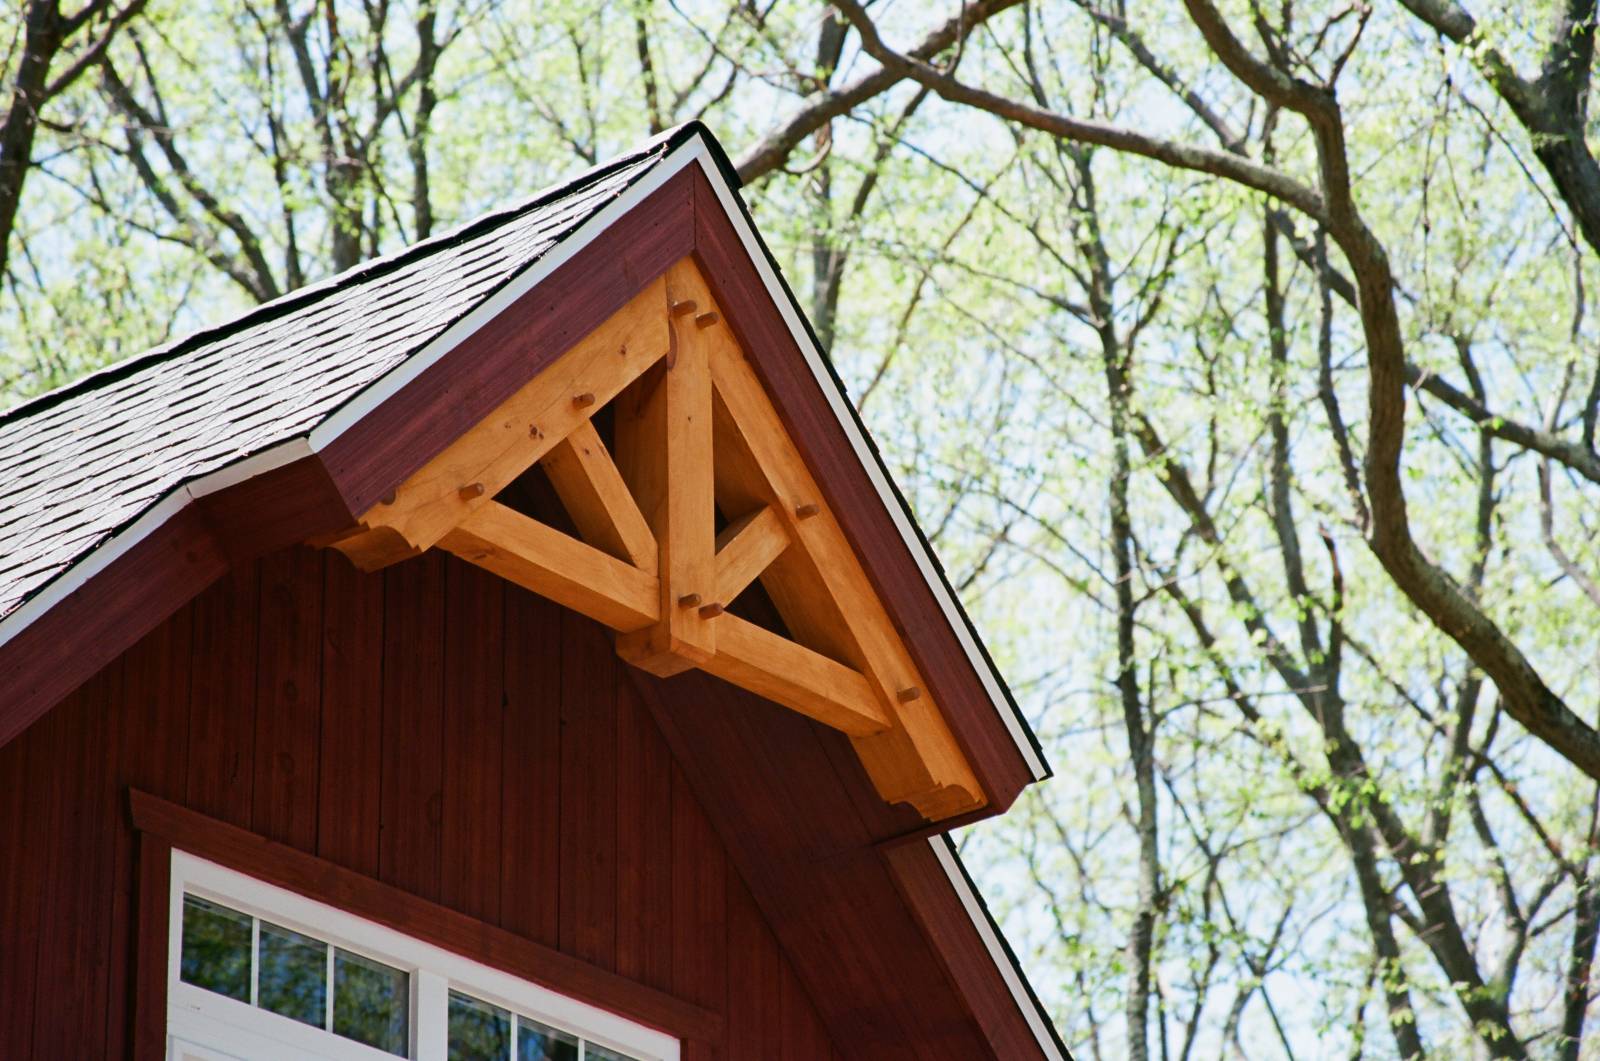 Timber accent in the gable